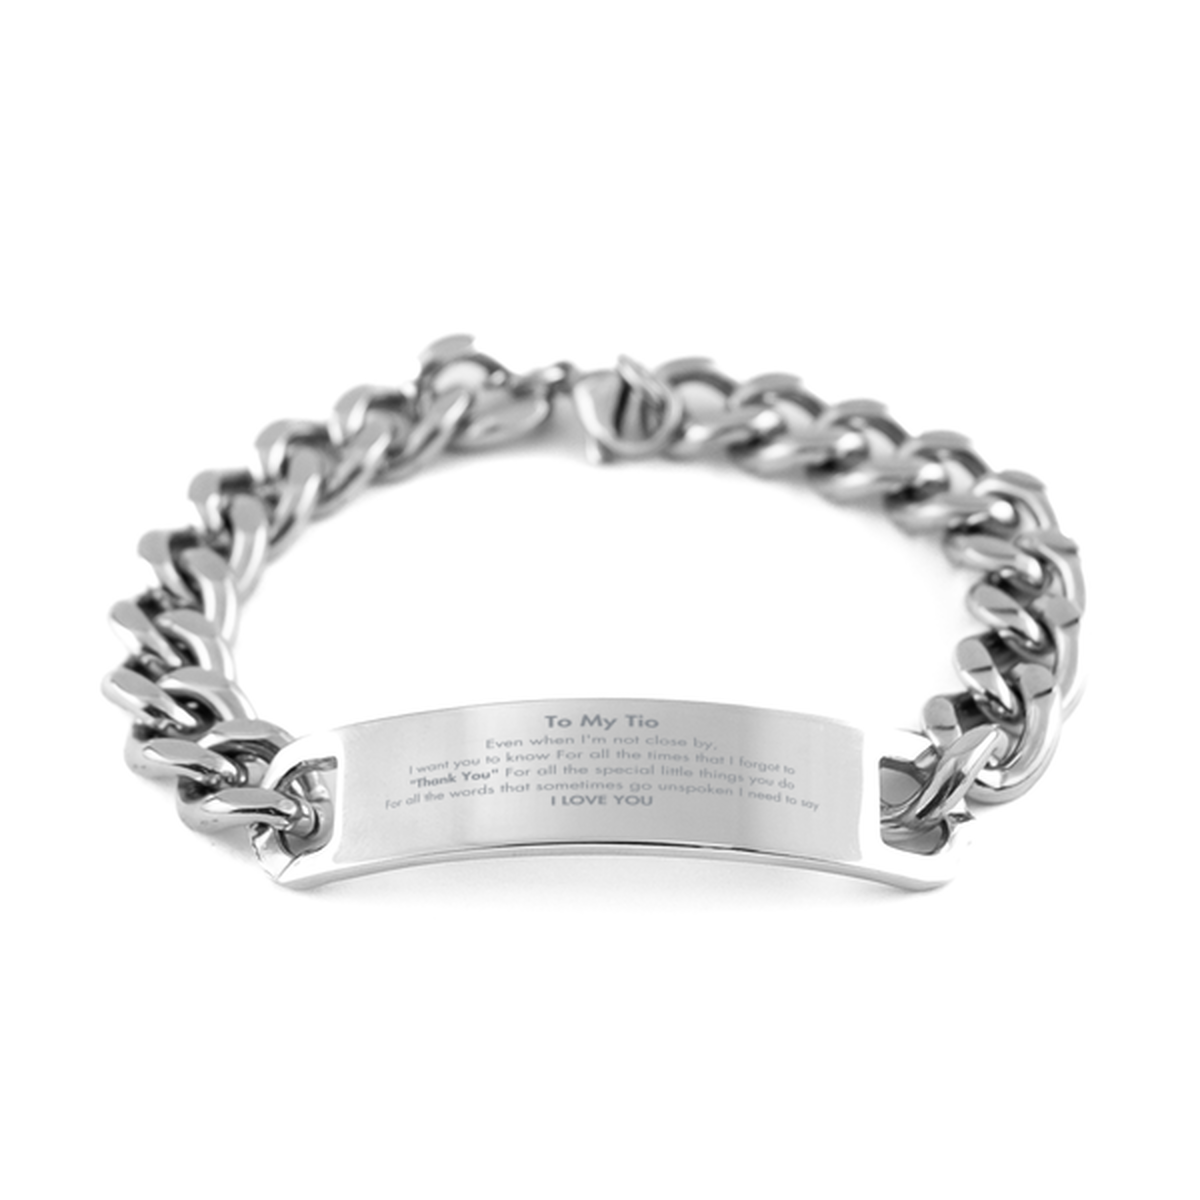 Thank You Gifts for Tio, Keepsake Cuban Chain Stainless Steel Bracelet Gifts for Tio Birthday Mother's day Father's Day Tio For all the words That sometimes go unspoken I need to say I LOVE YOU